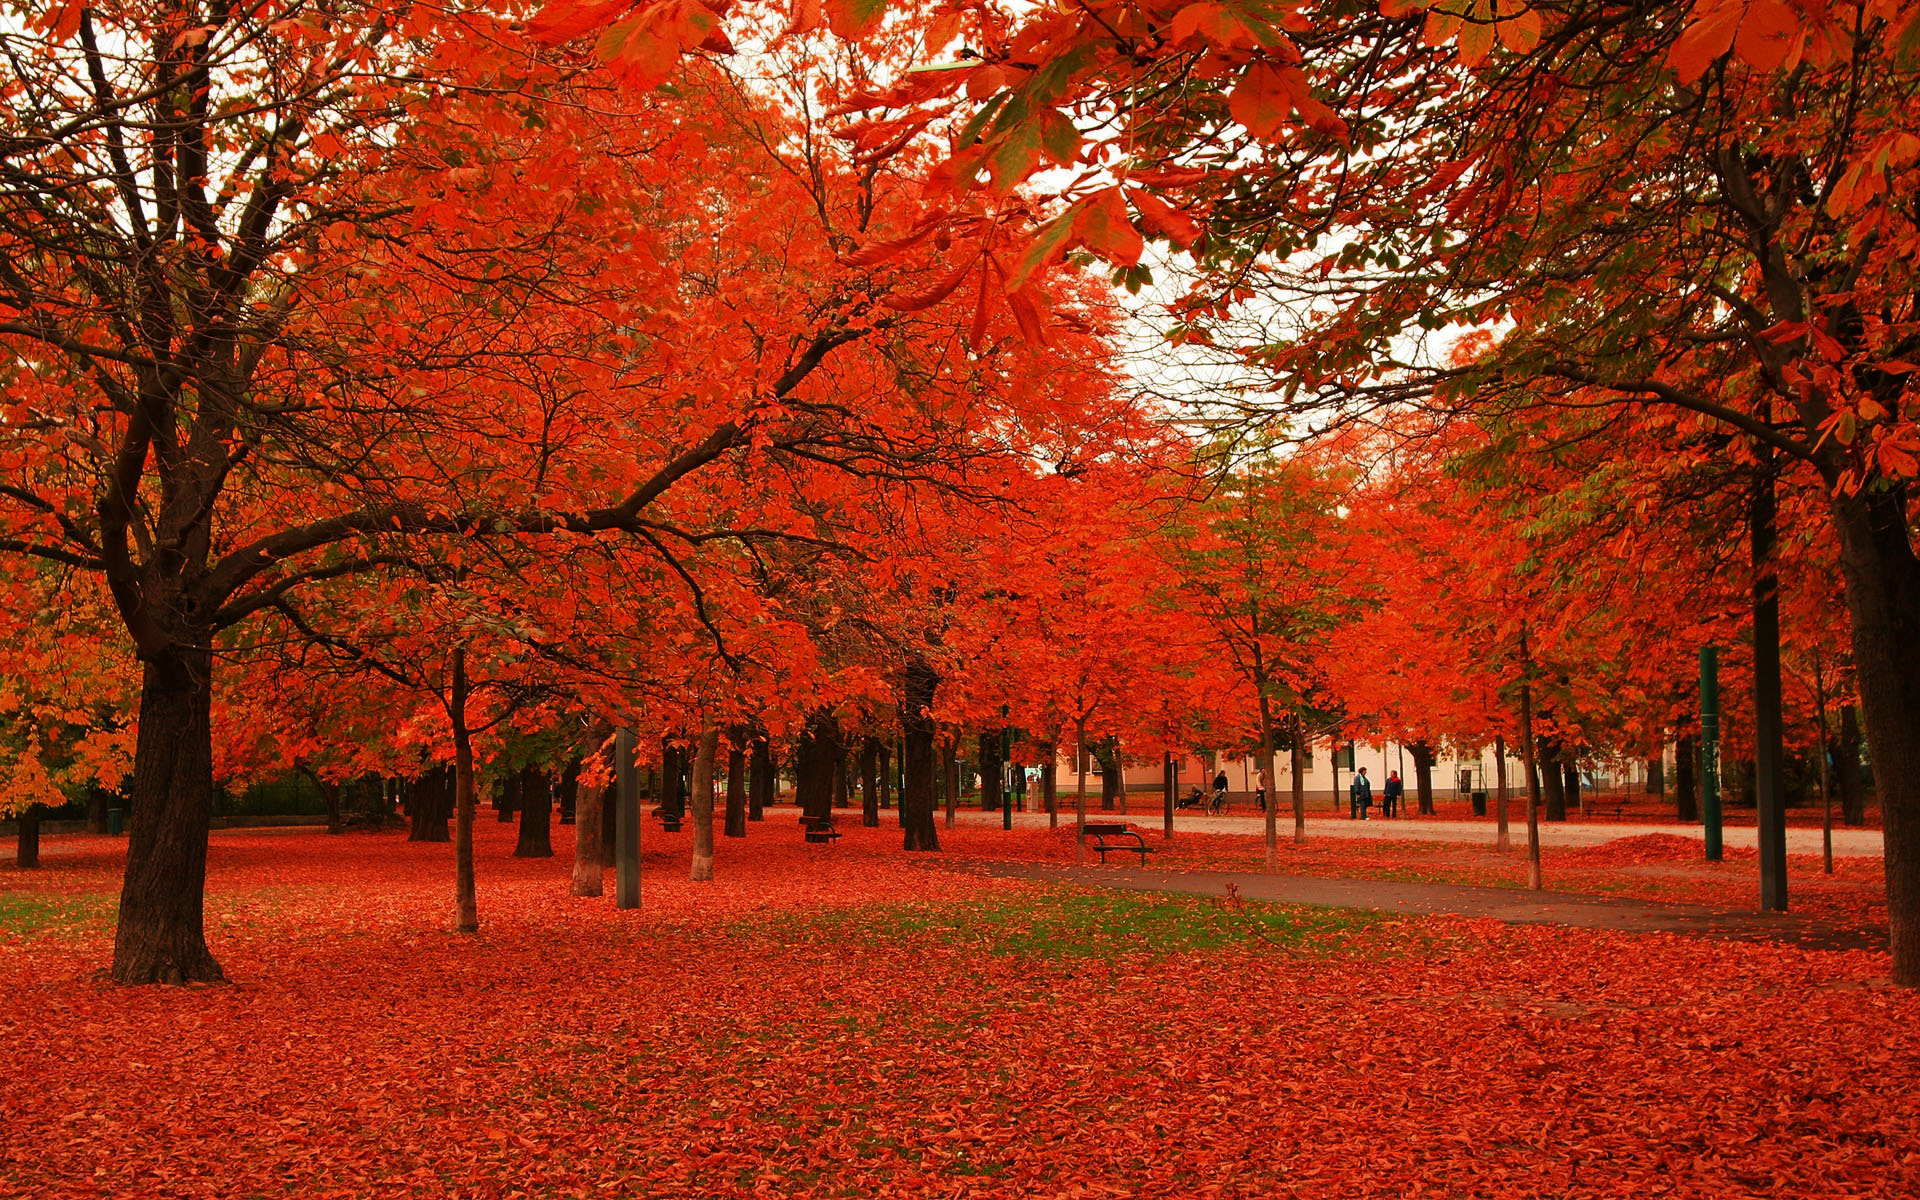 Red Autumn Leaves Wallpaper, High Definition, High Quality, Widescreen